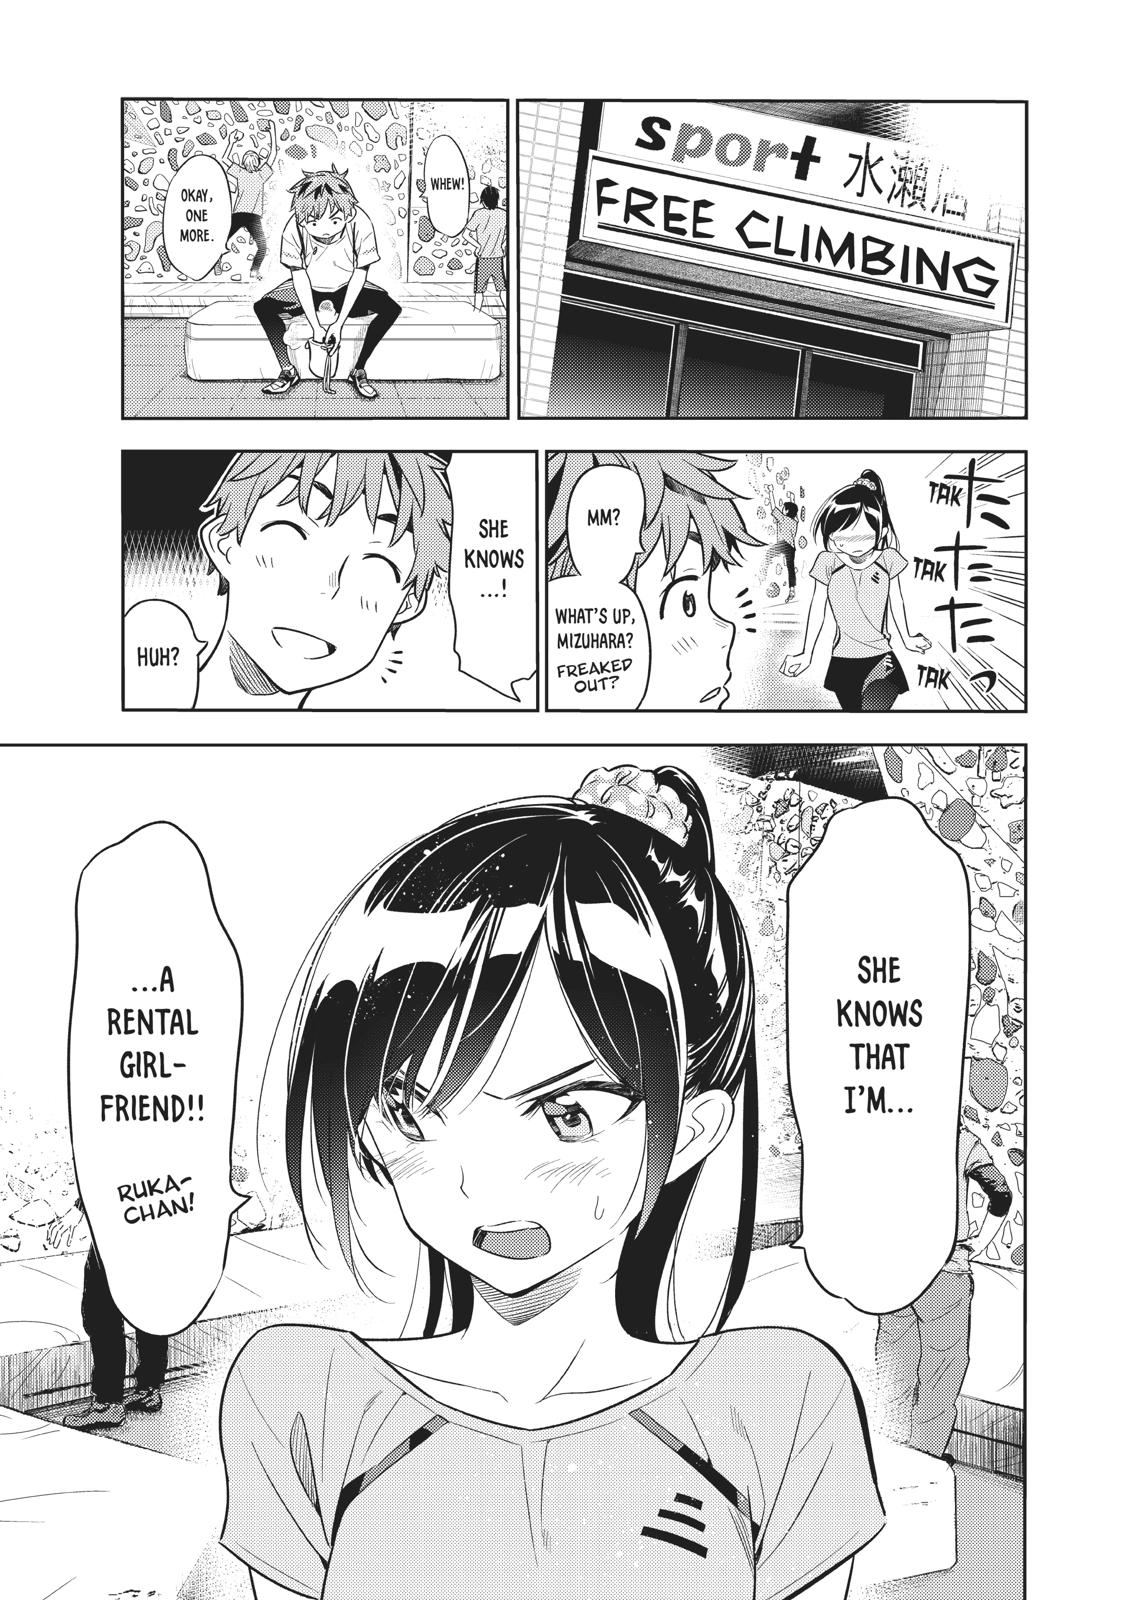 Rent A GirlFriend, Chapter 22 image 005